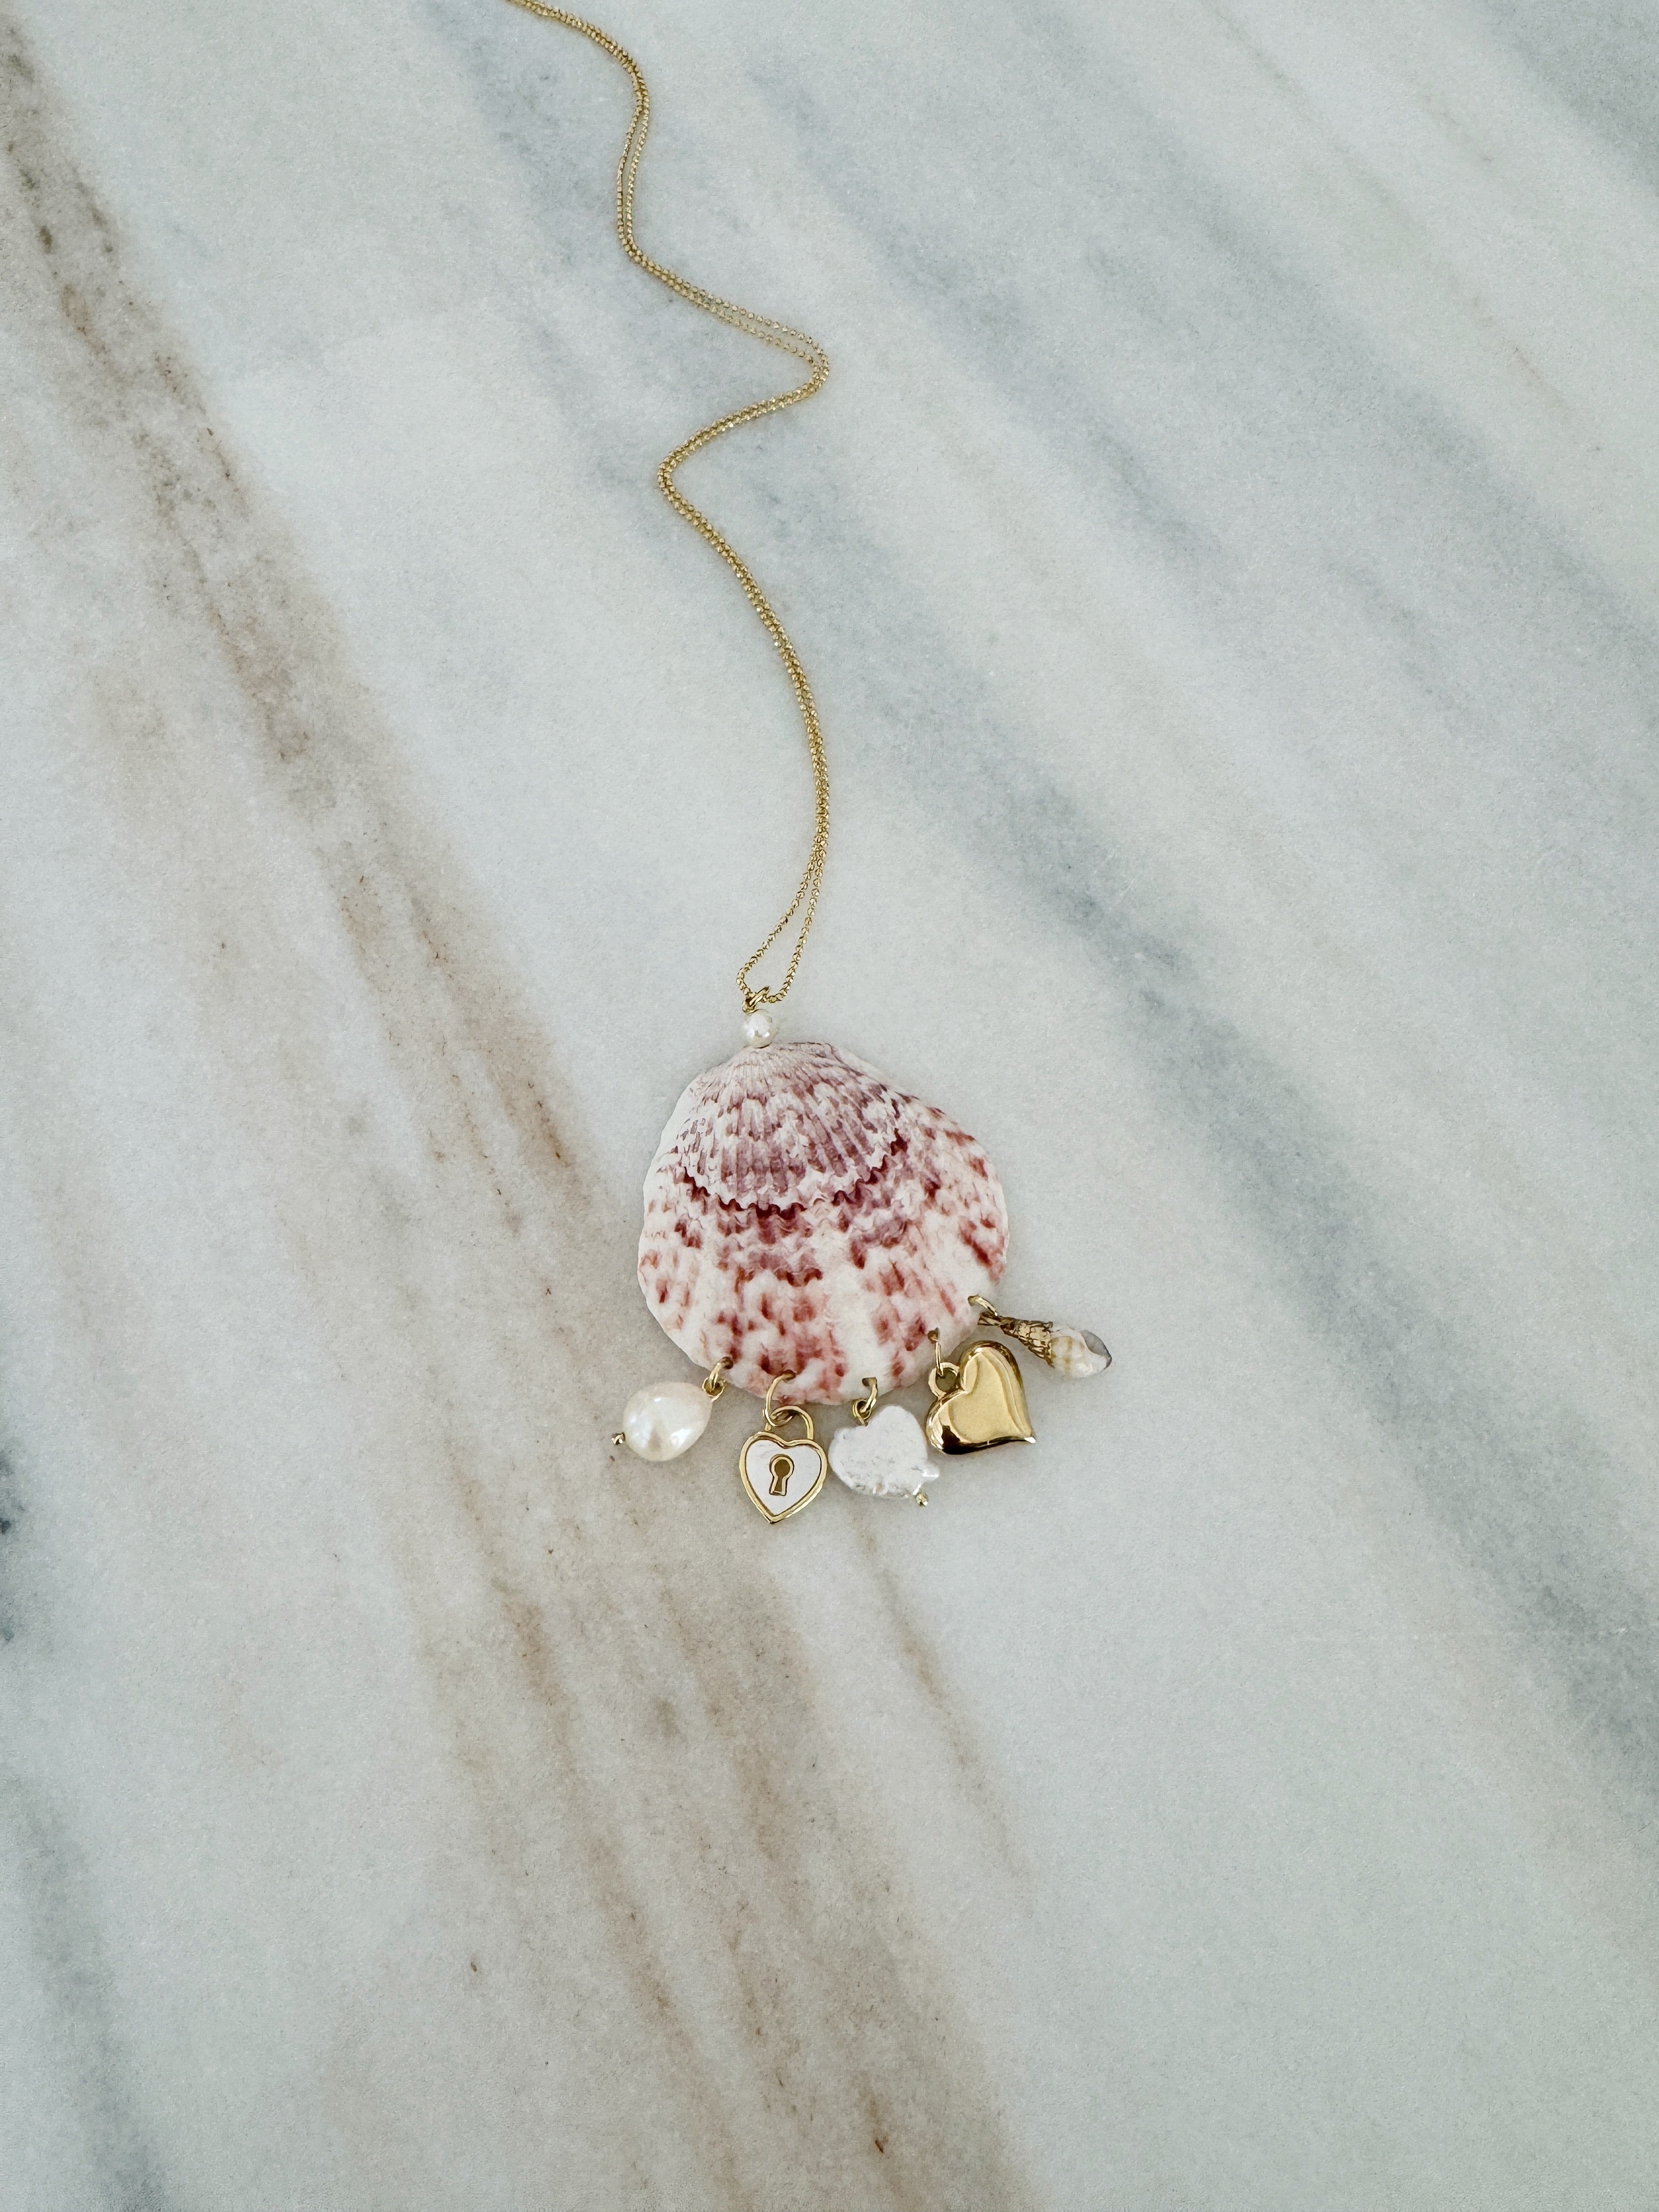 Shell necklace with gold charms